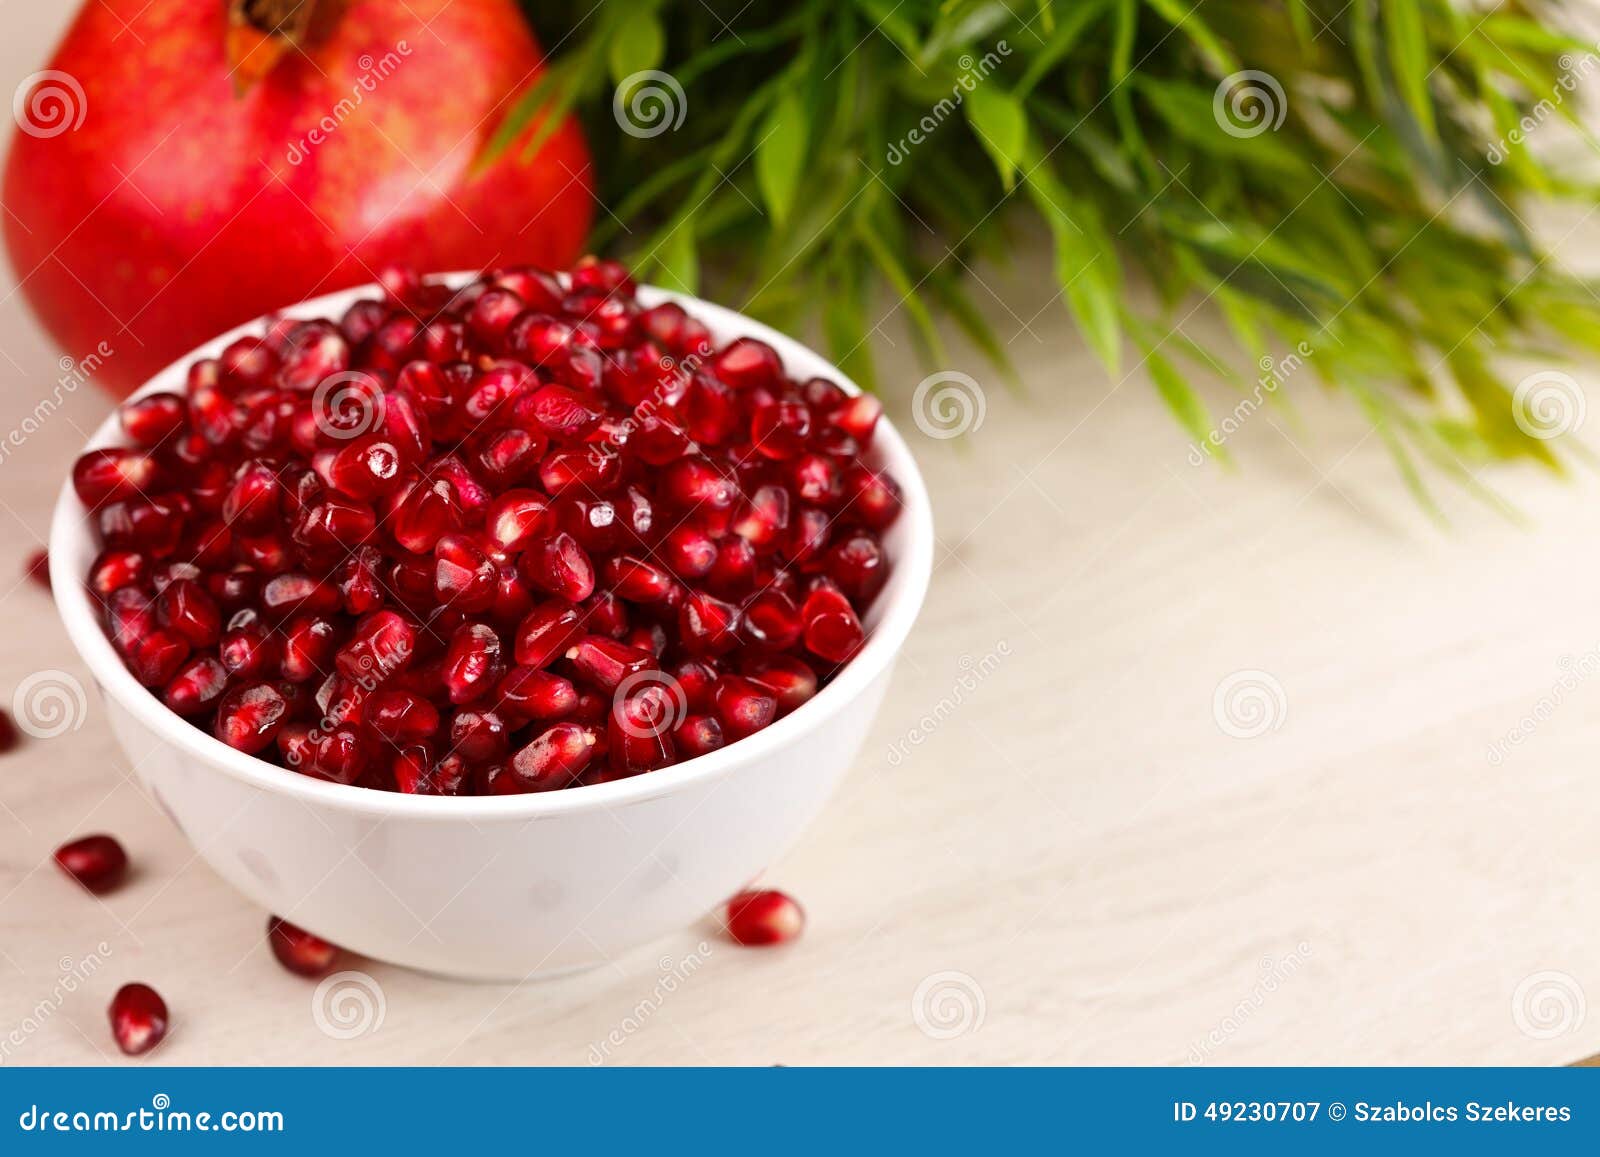 grenadine seeds with fruit and leaves